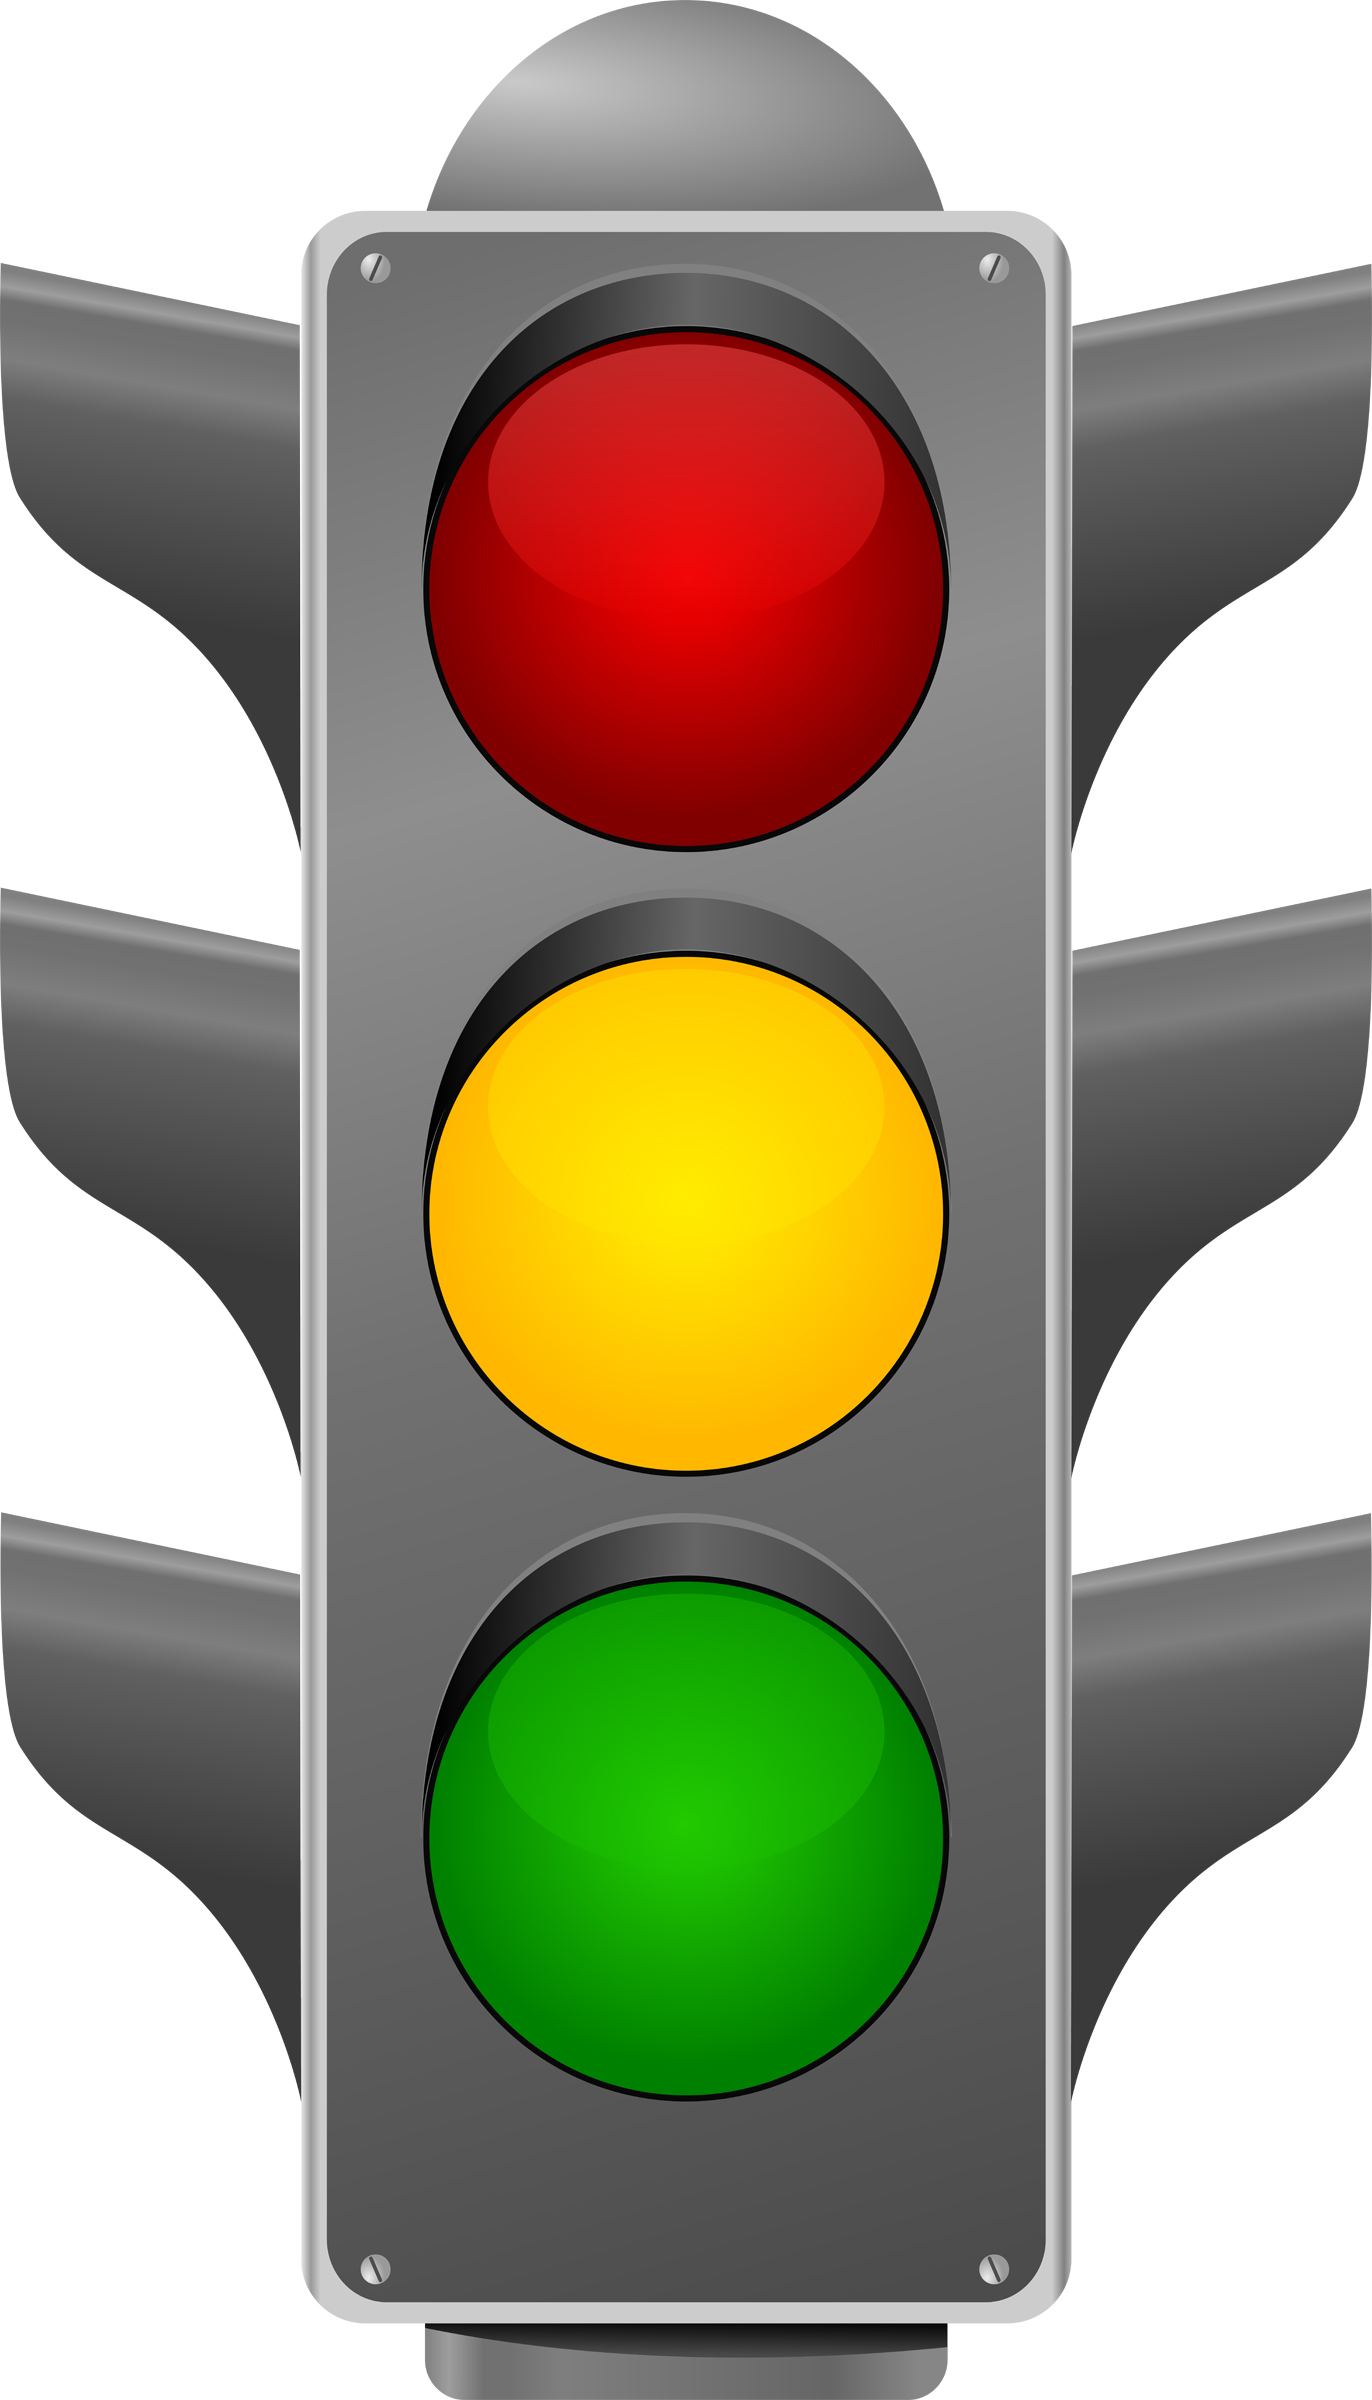 Pictures Of A Traffic Light - ClipArt Best